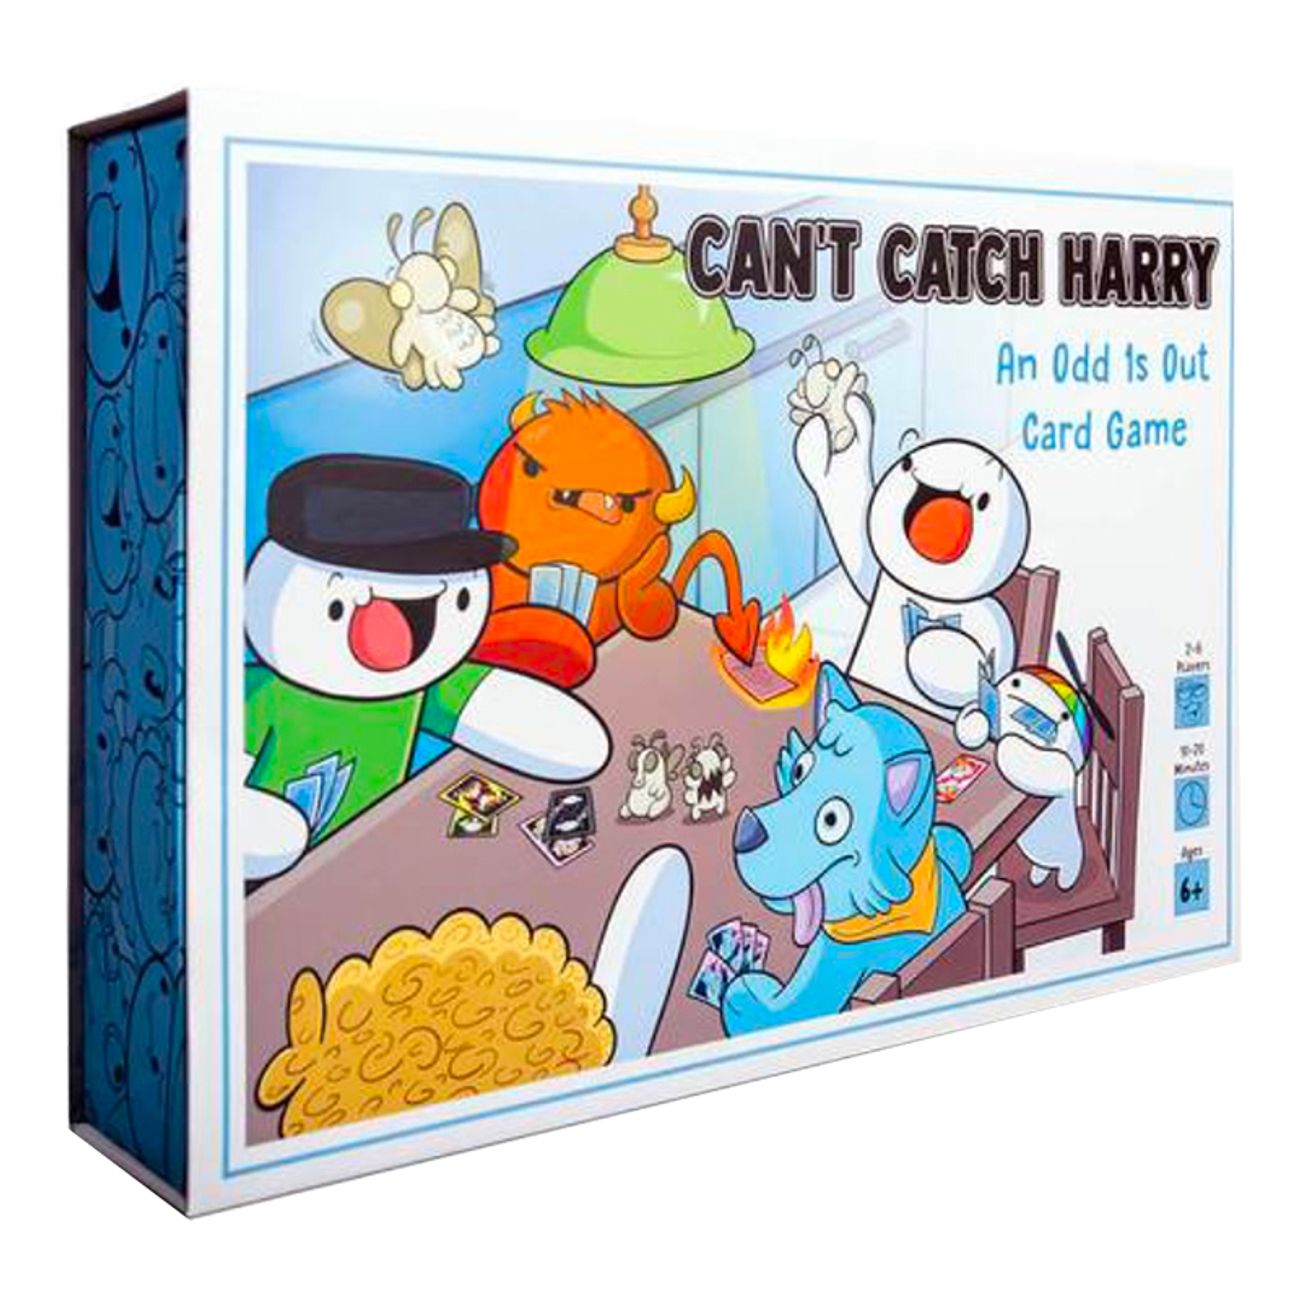 cant-catch-harry-spel-75754-1